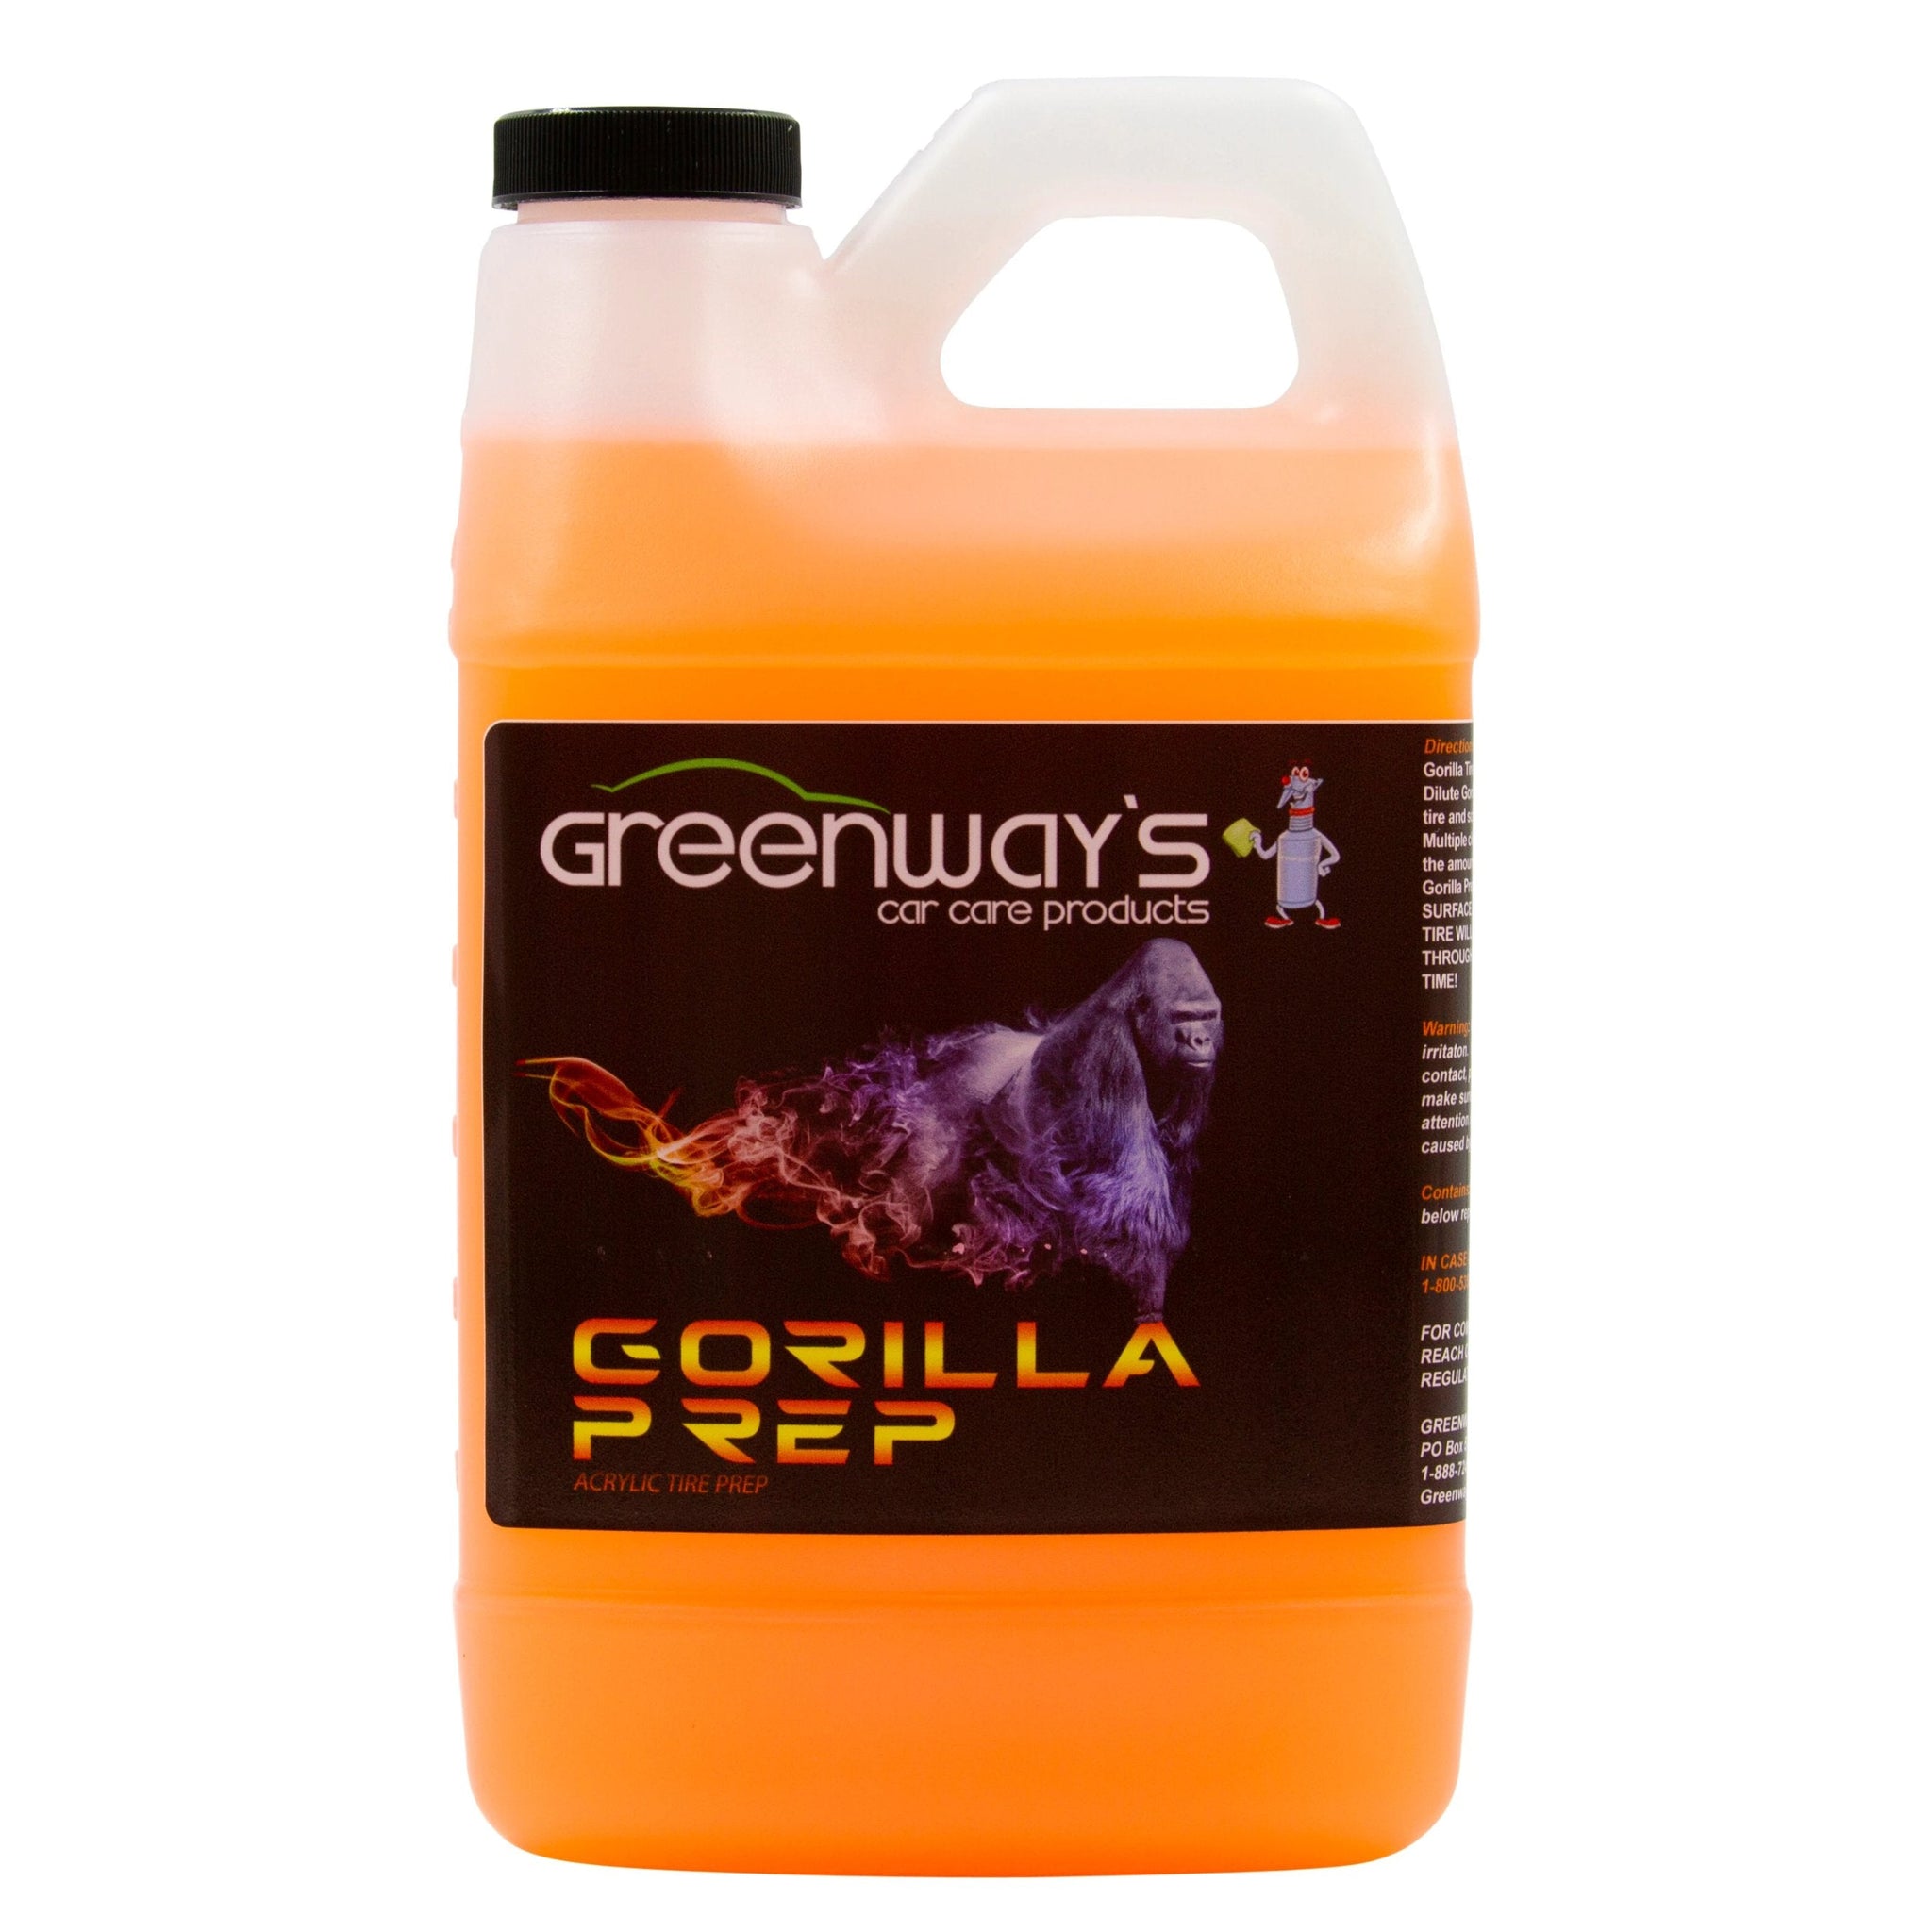 Greenway’s Car Care Products Gorilla Prep, ultra-concentrated foaming acrylic tire shine prep, low or high sheen, 64 ounces.